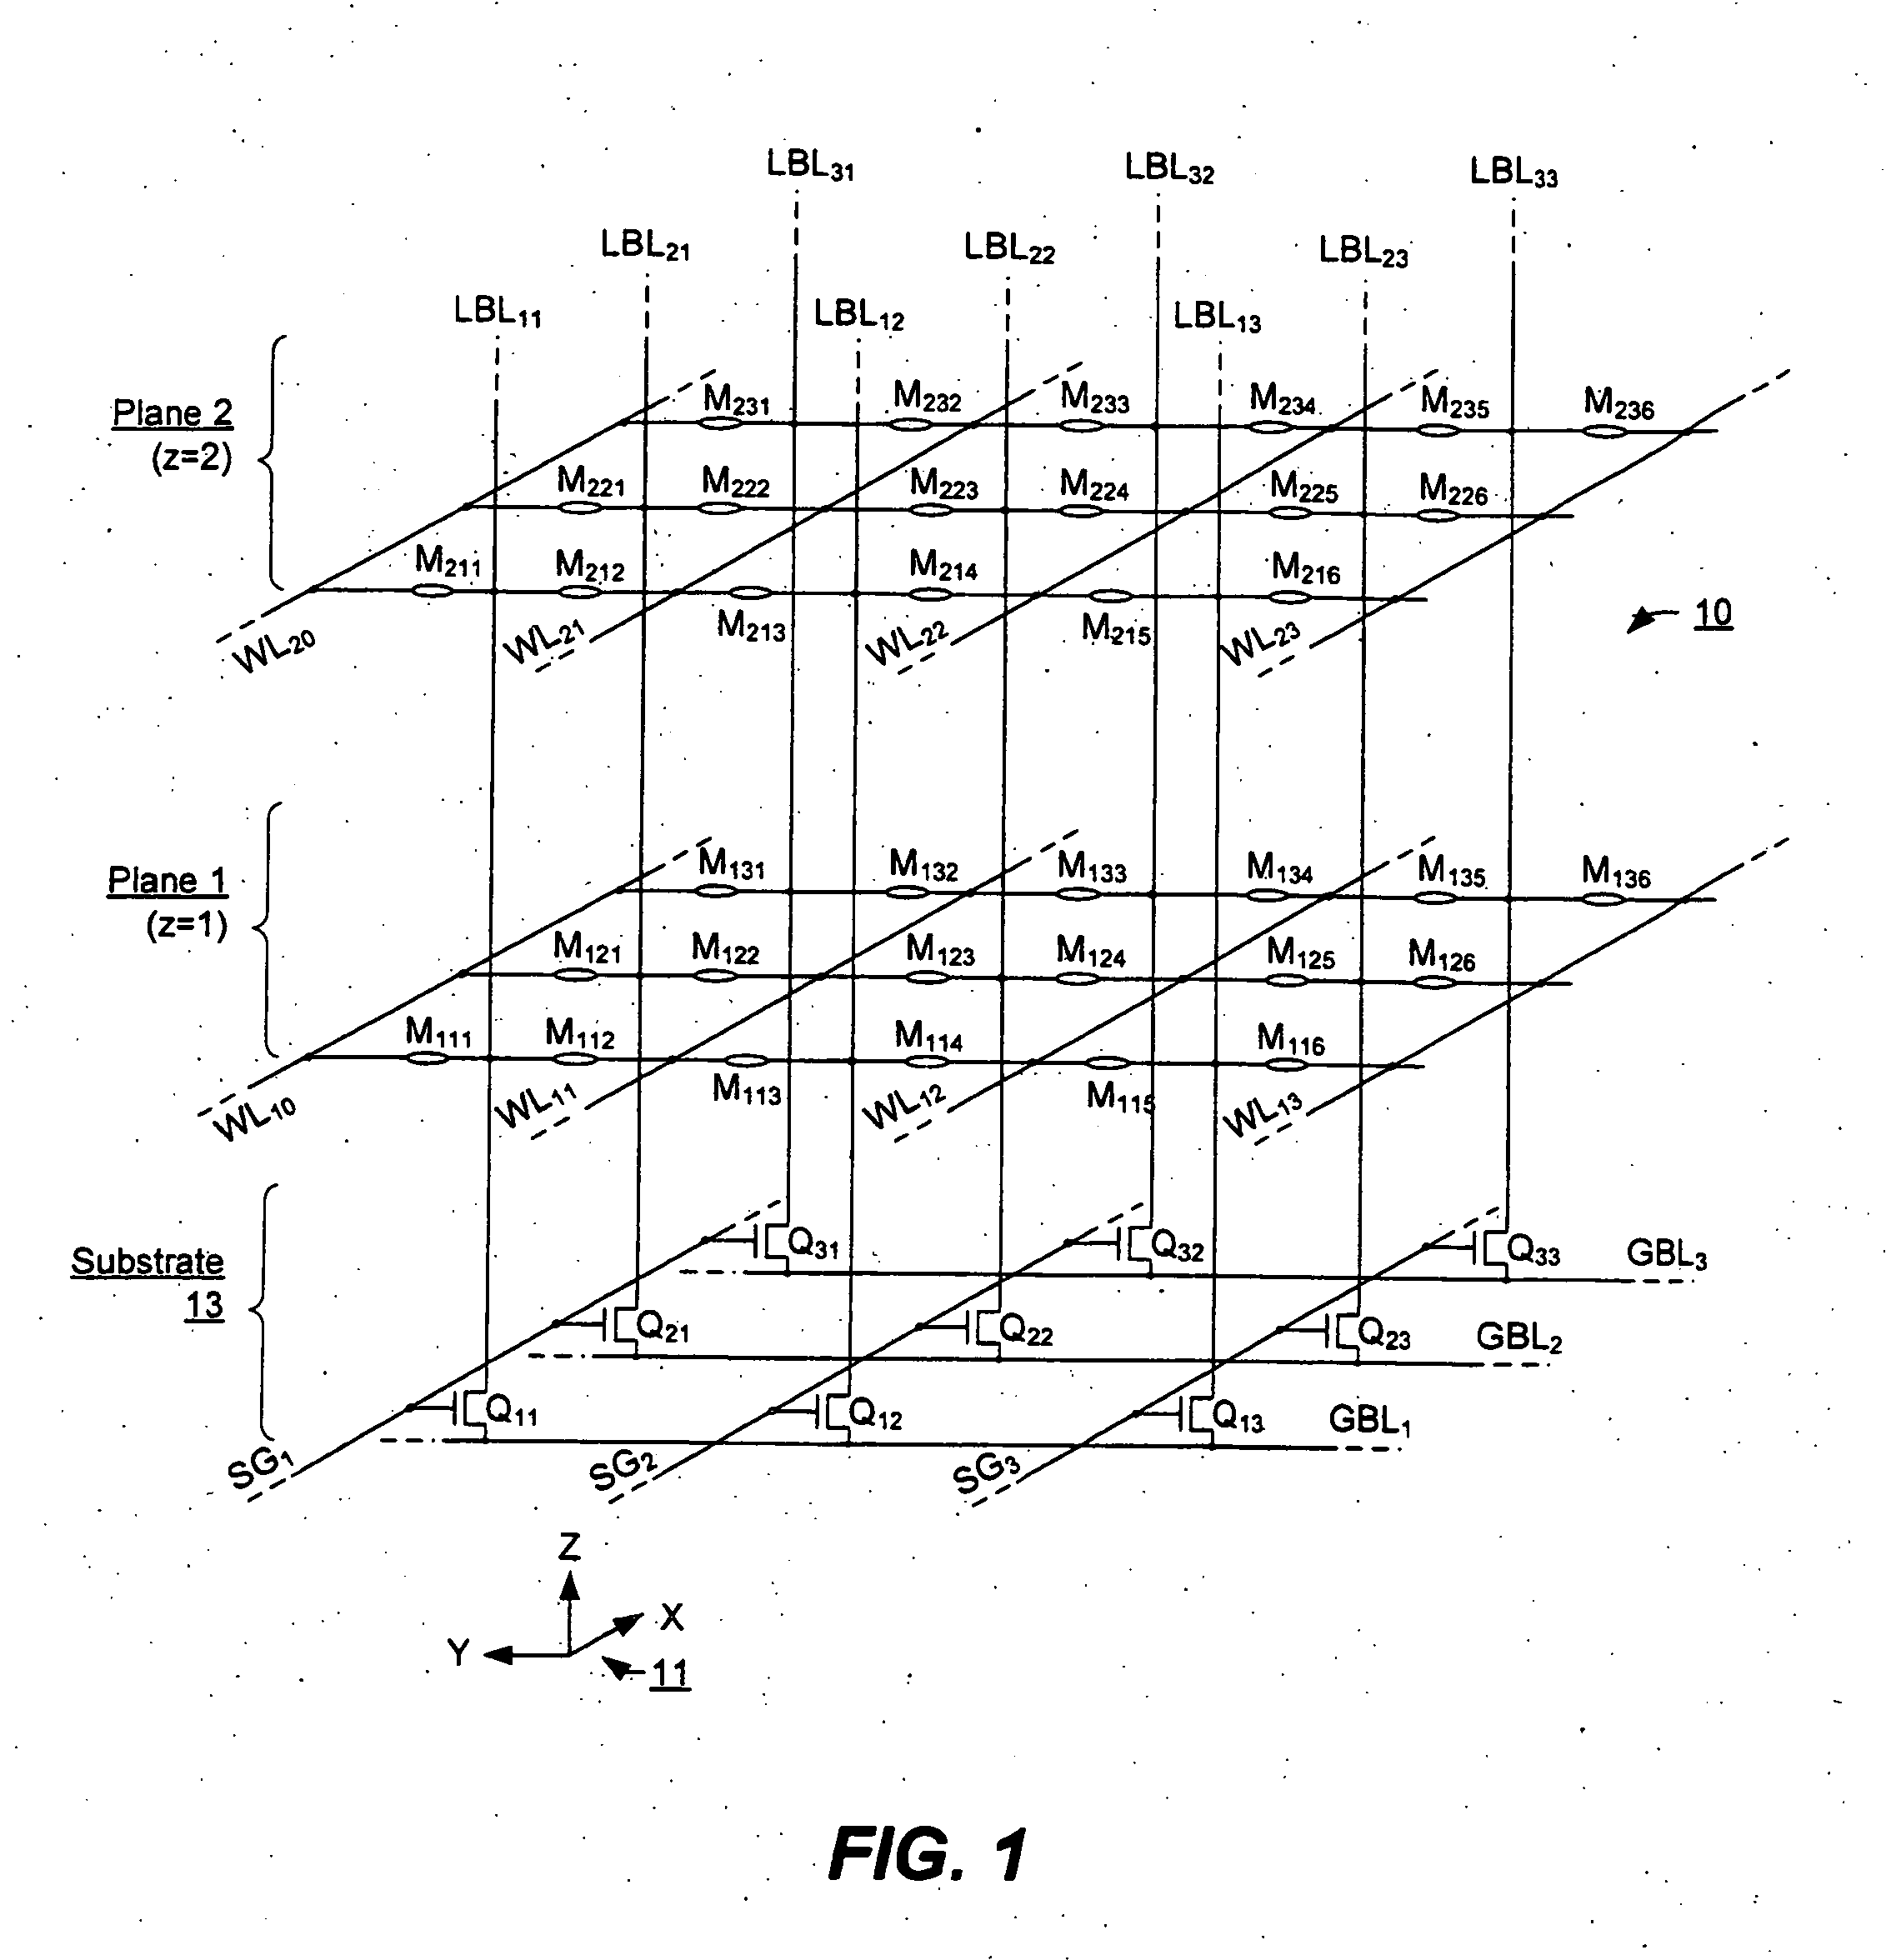 Three-Dimensional Array of Re-Programmable Non-Volatile Memory Elements Having Vertical Bit Lines and a Single-Sided Word Line Architecture